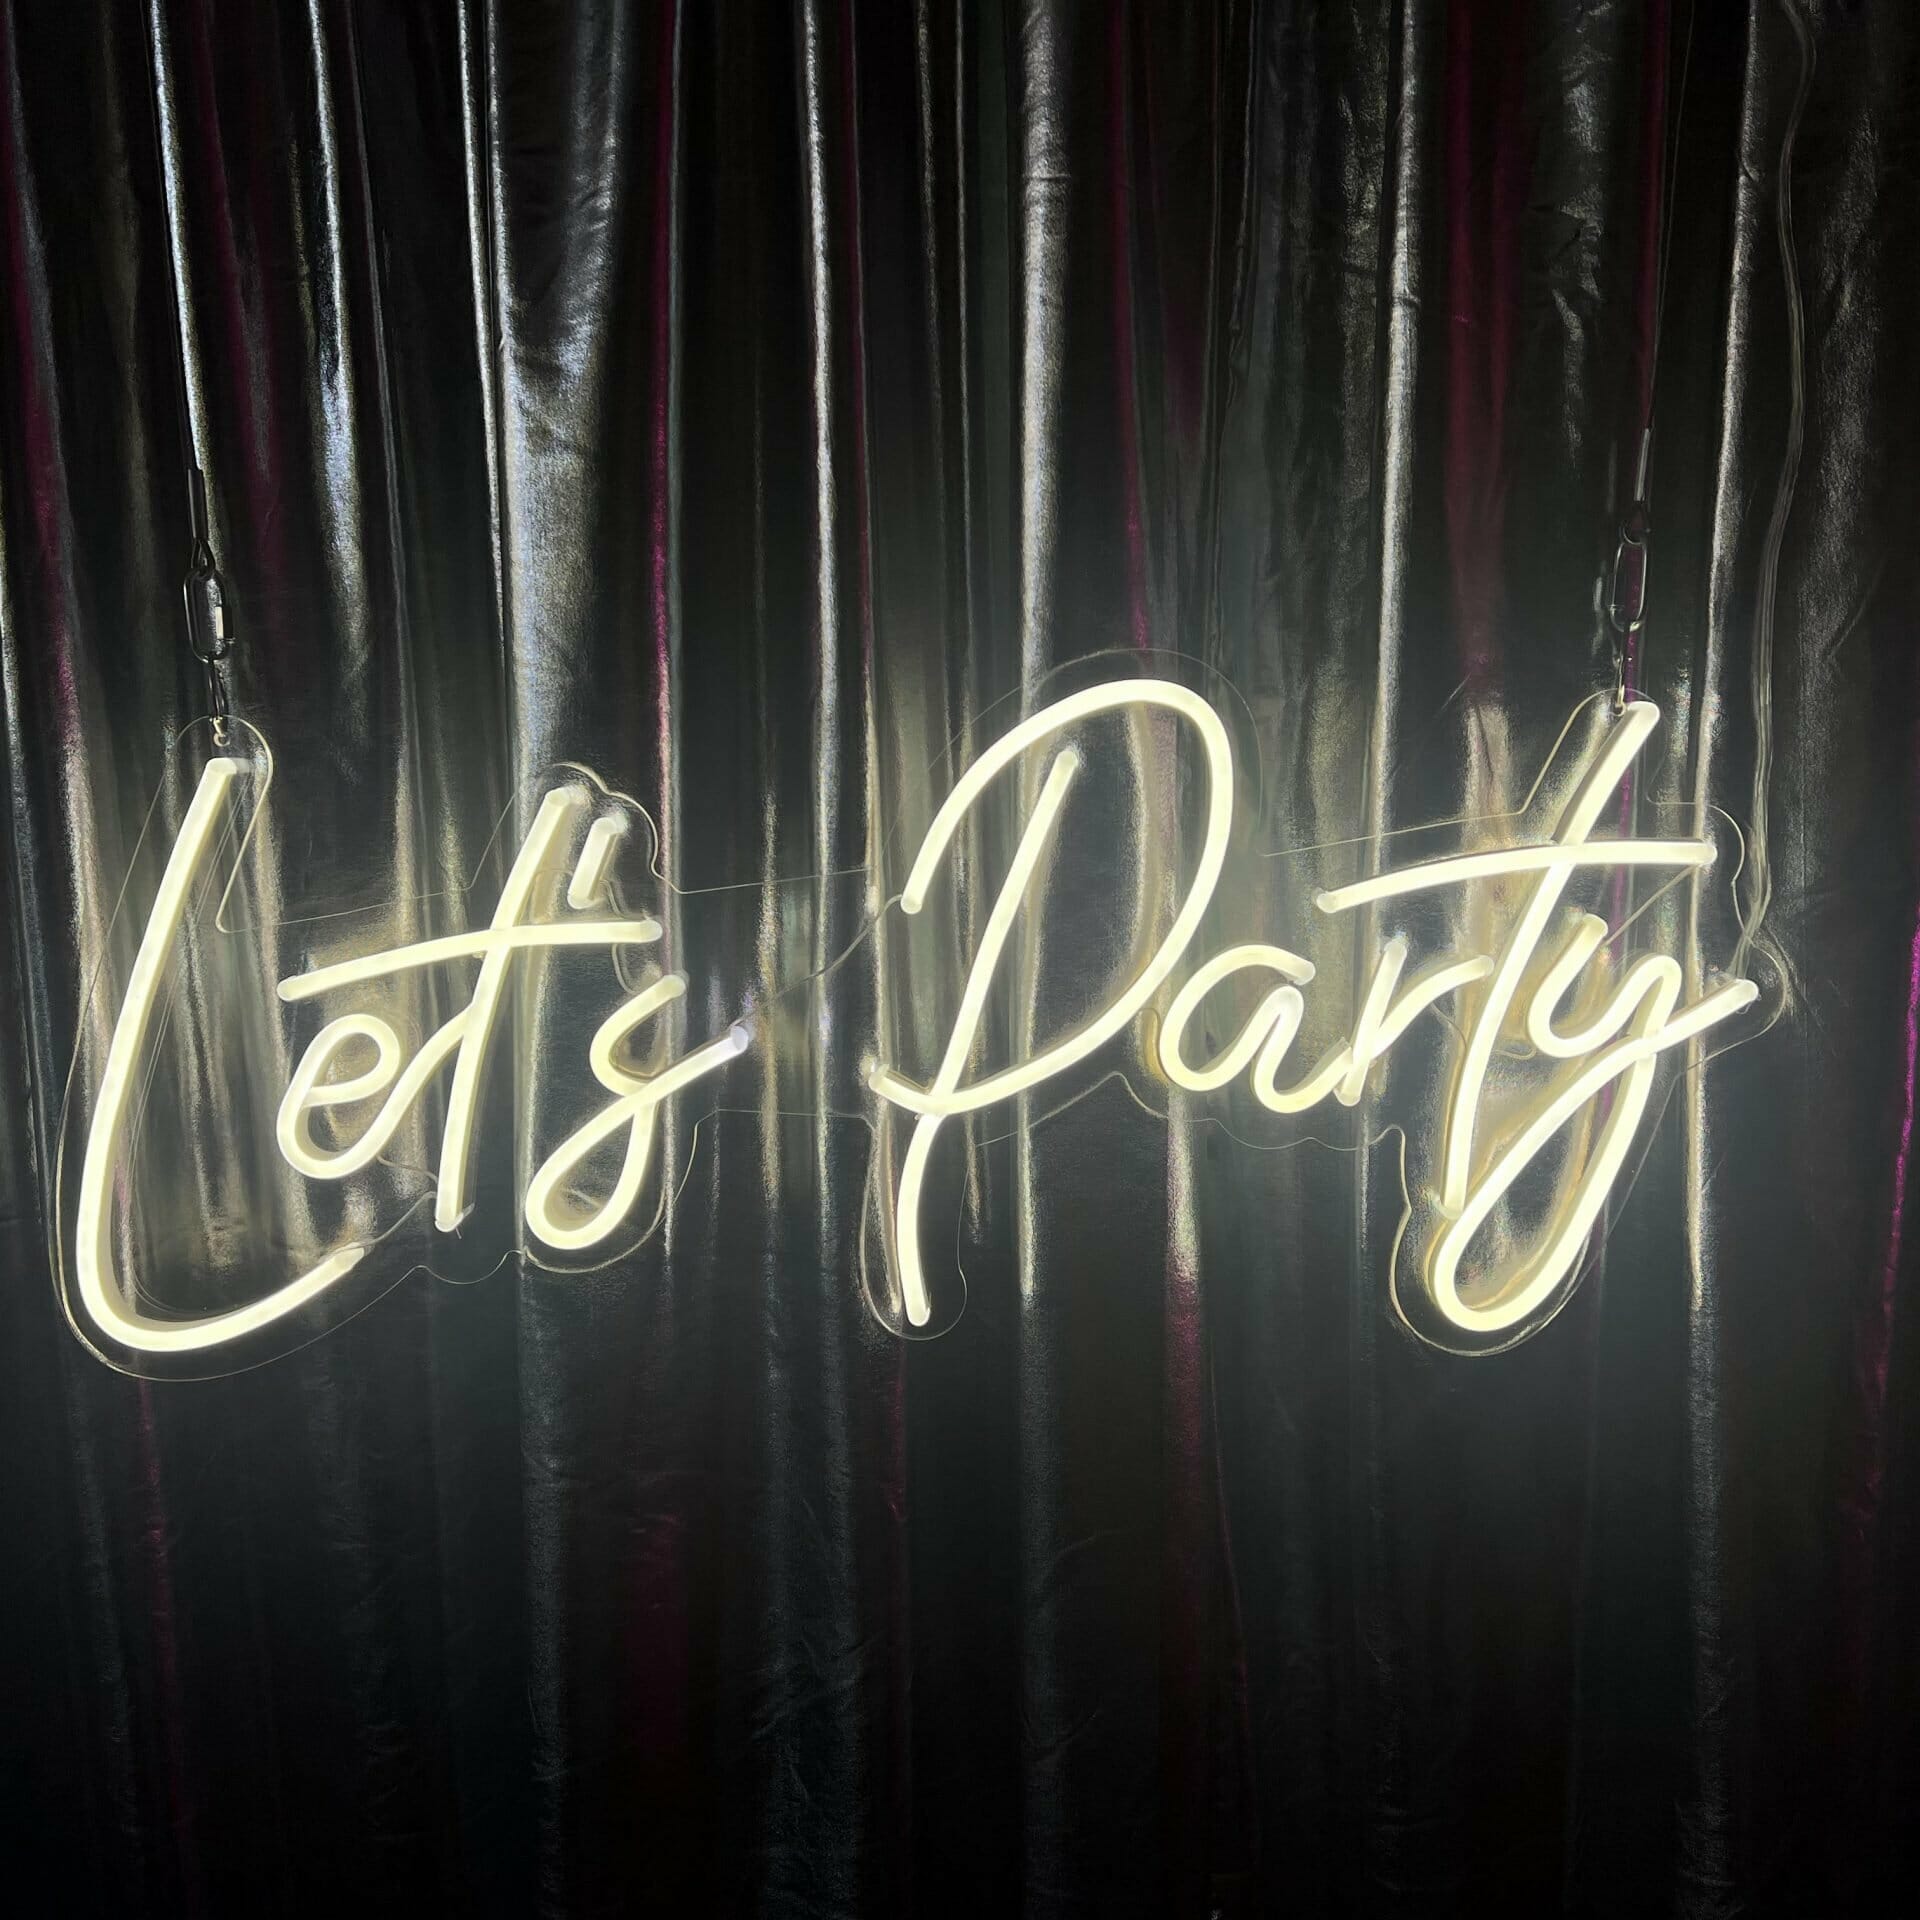 lets party neon sign with silver draping